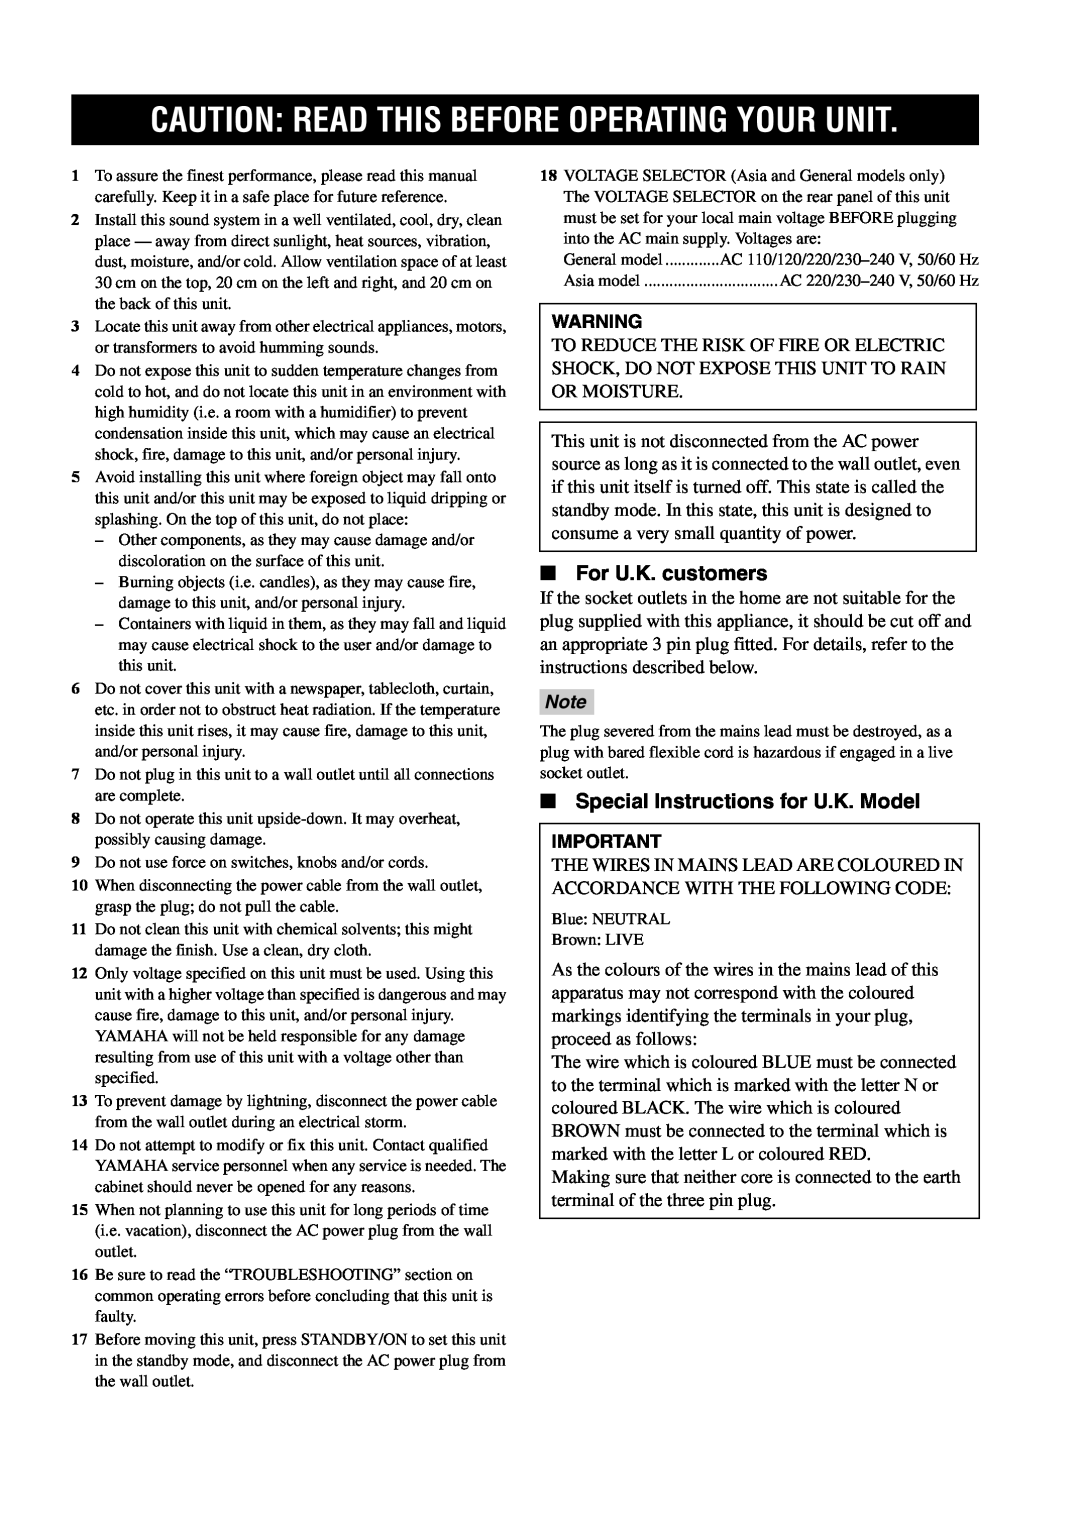 Yamaha RX-V2500 Caution: Read This Before Operating Your Unit, For U.K. customers, Special Instructions for U.K. Model 